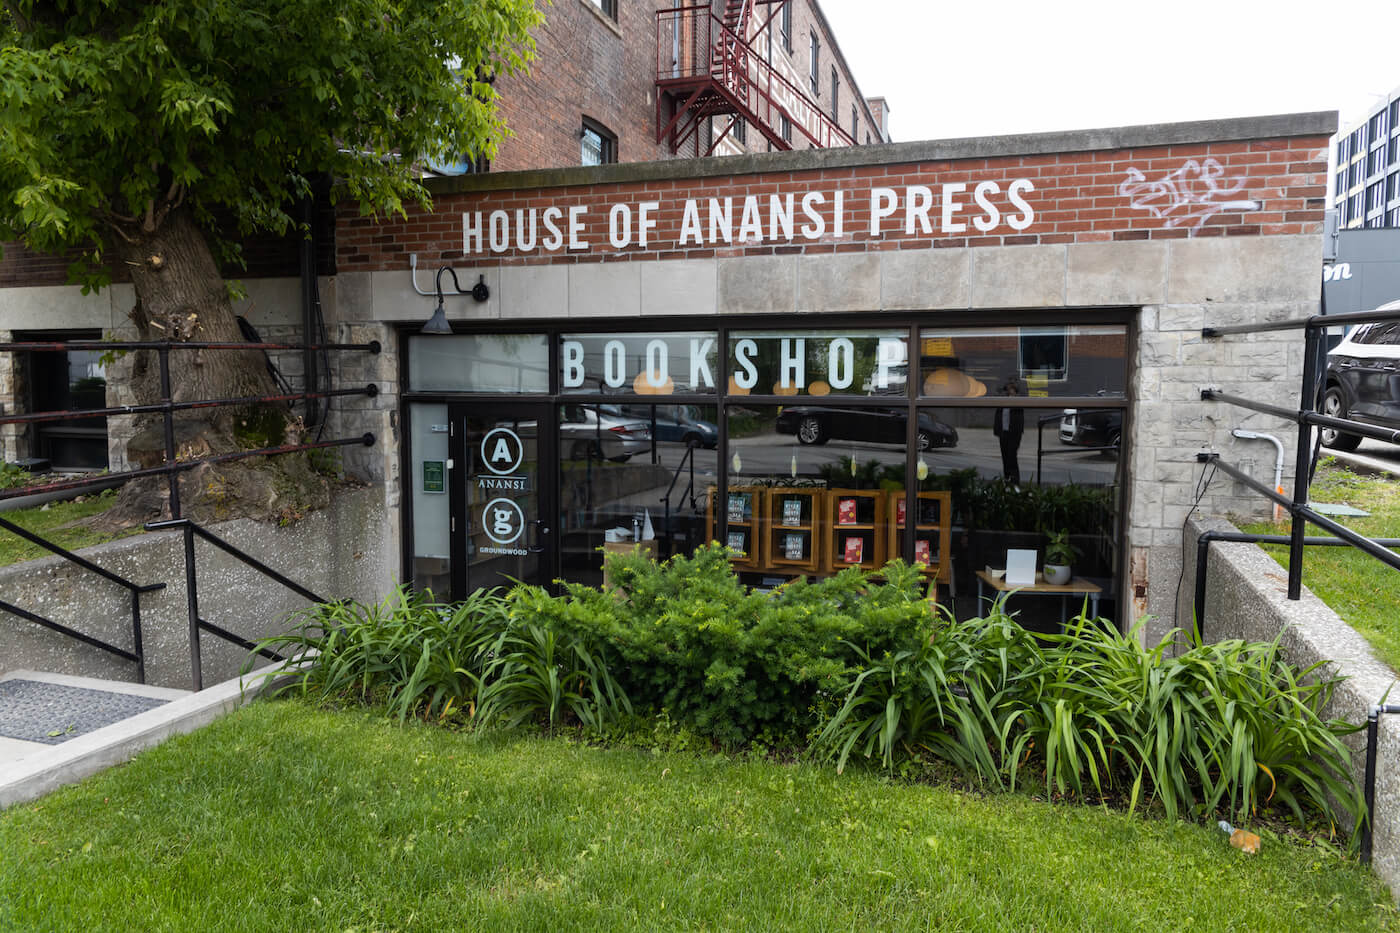 Things to do in Roncesvalles – House of Anansi Press